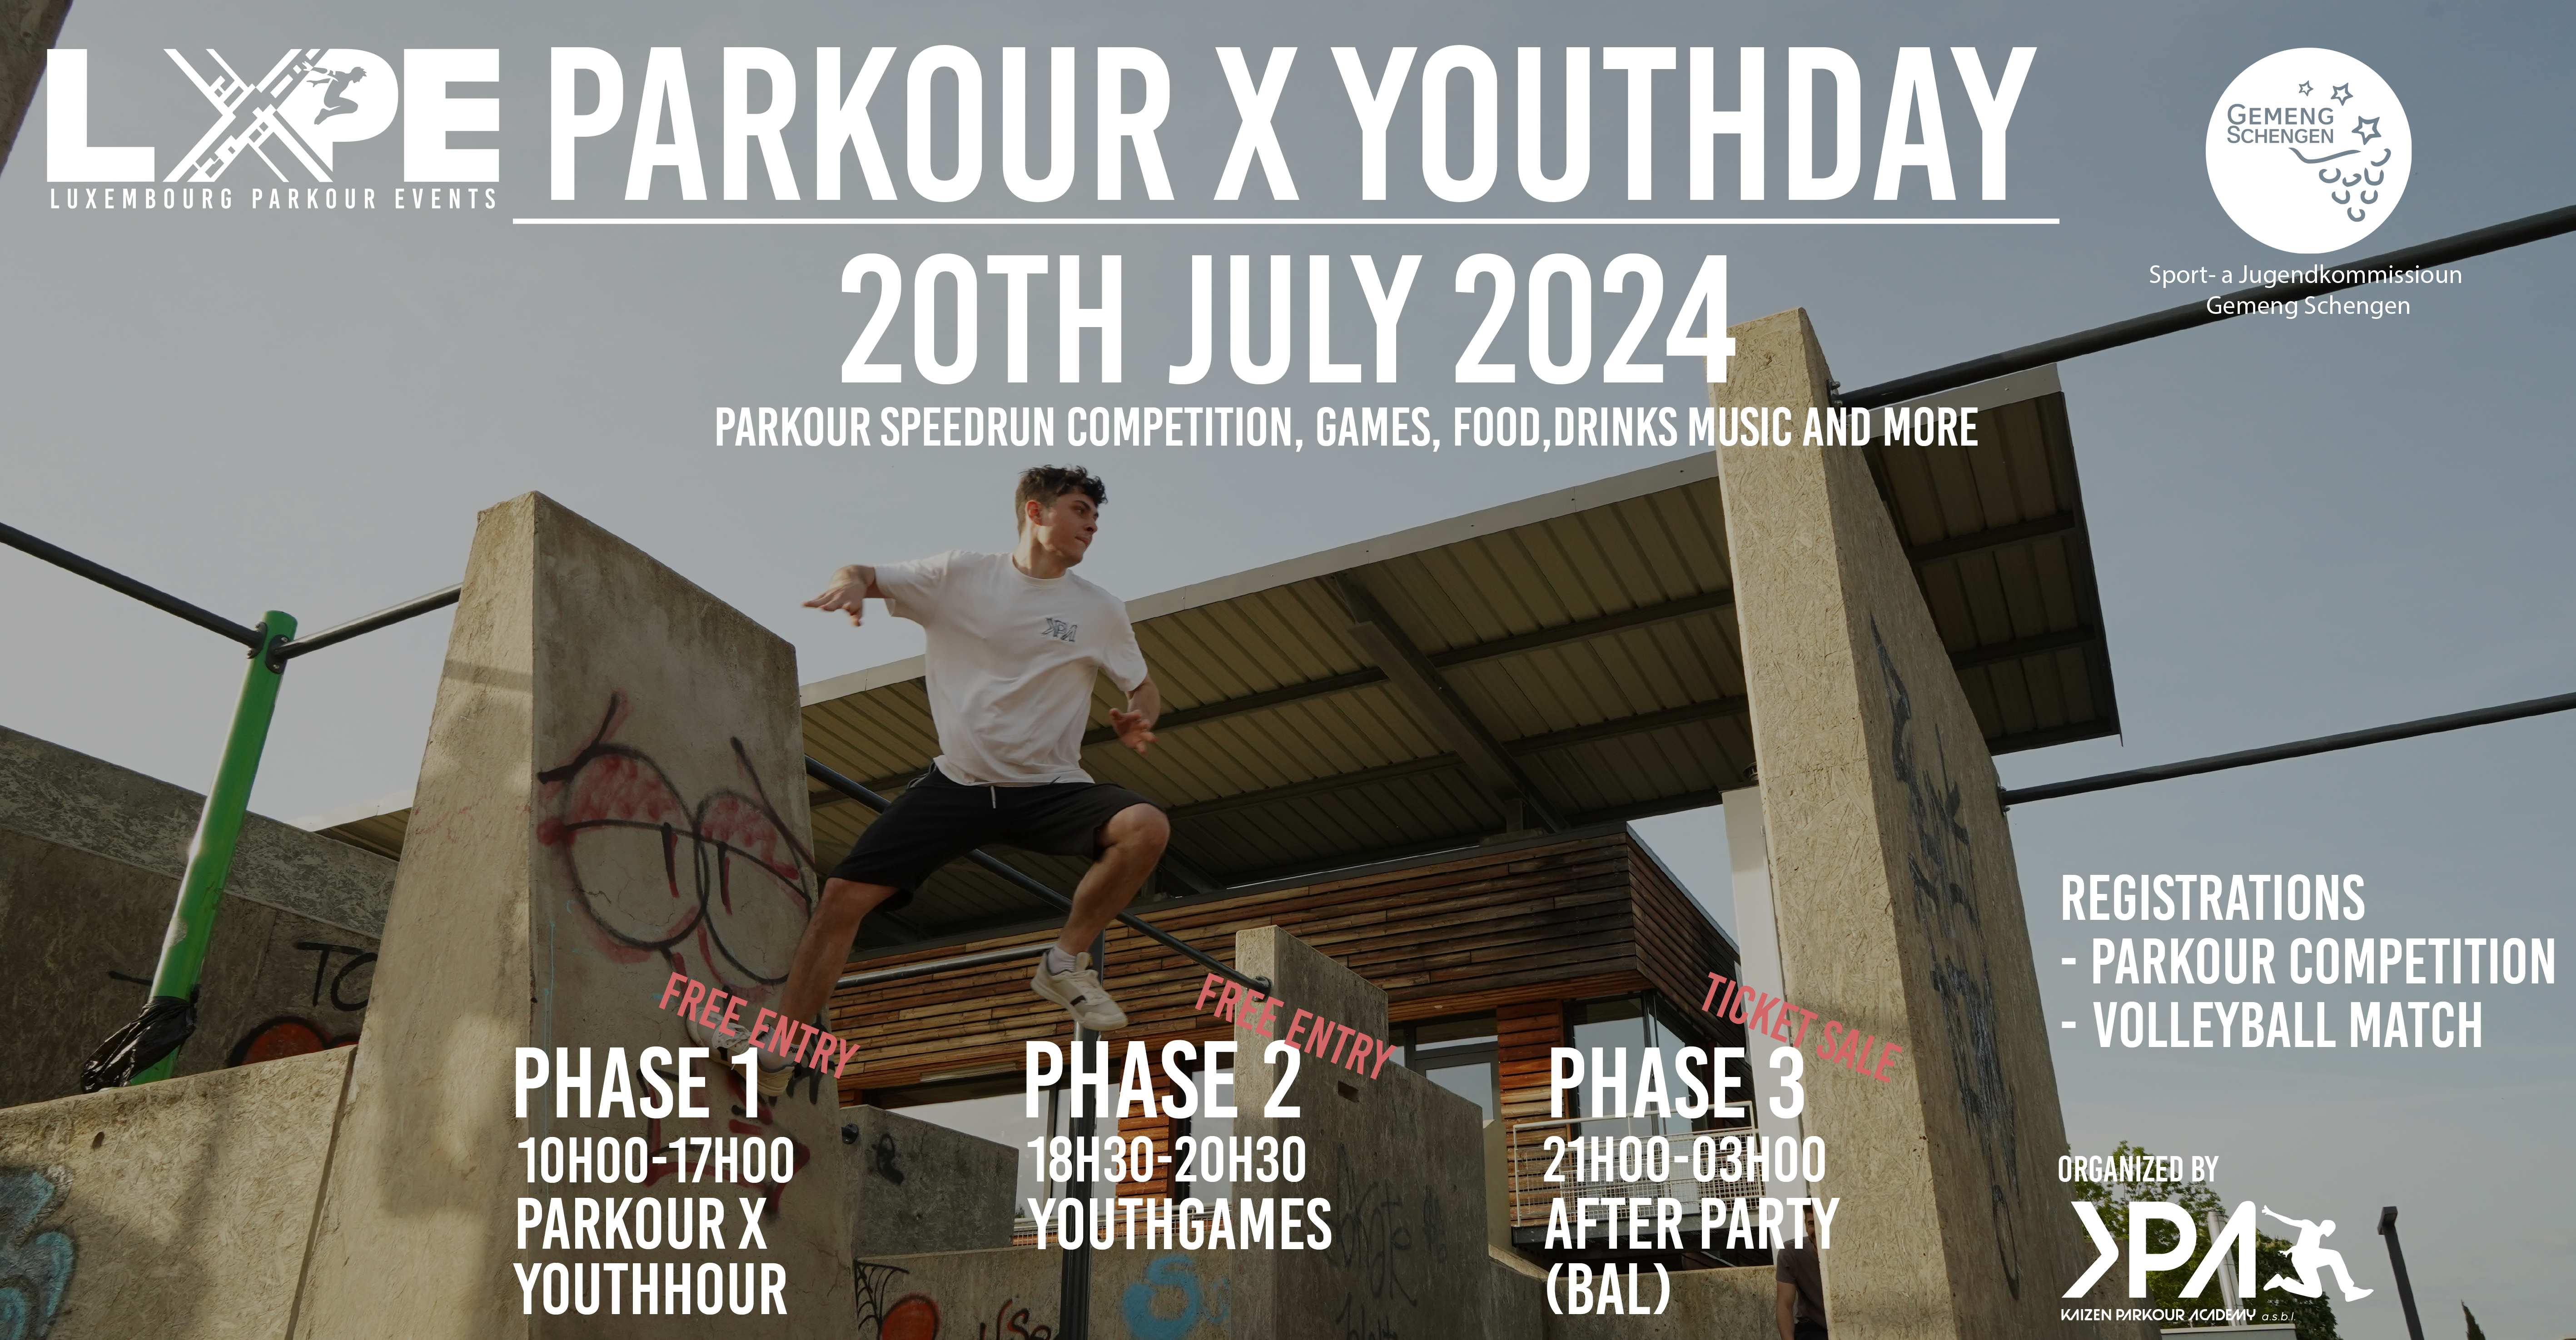 PARKOUR X YOUTHDAY